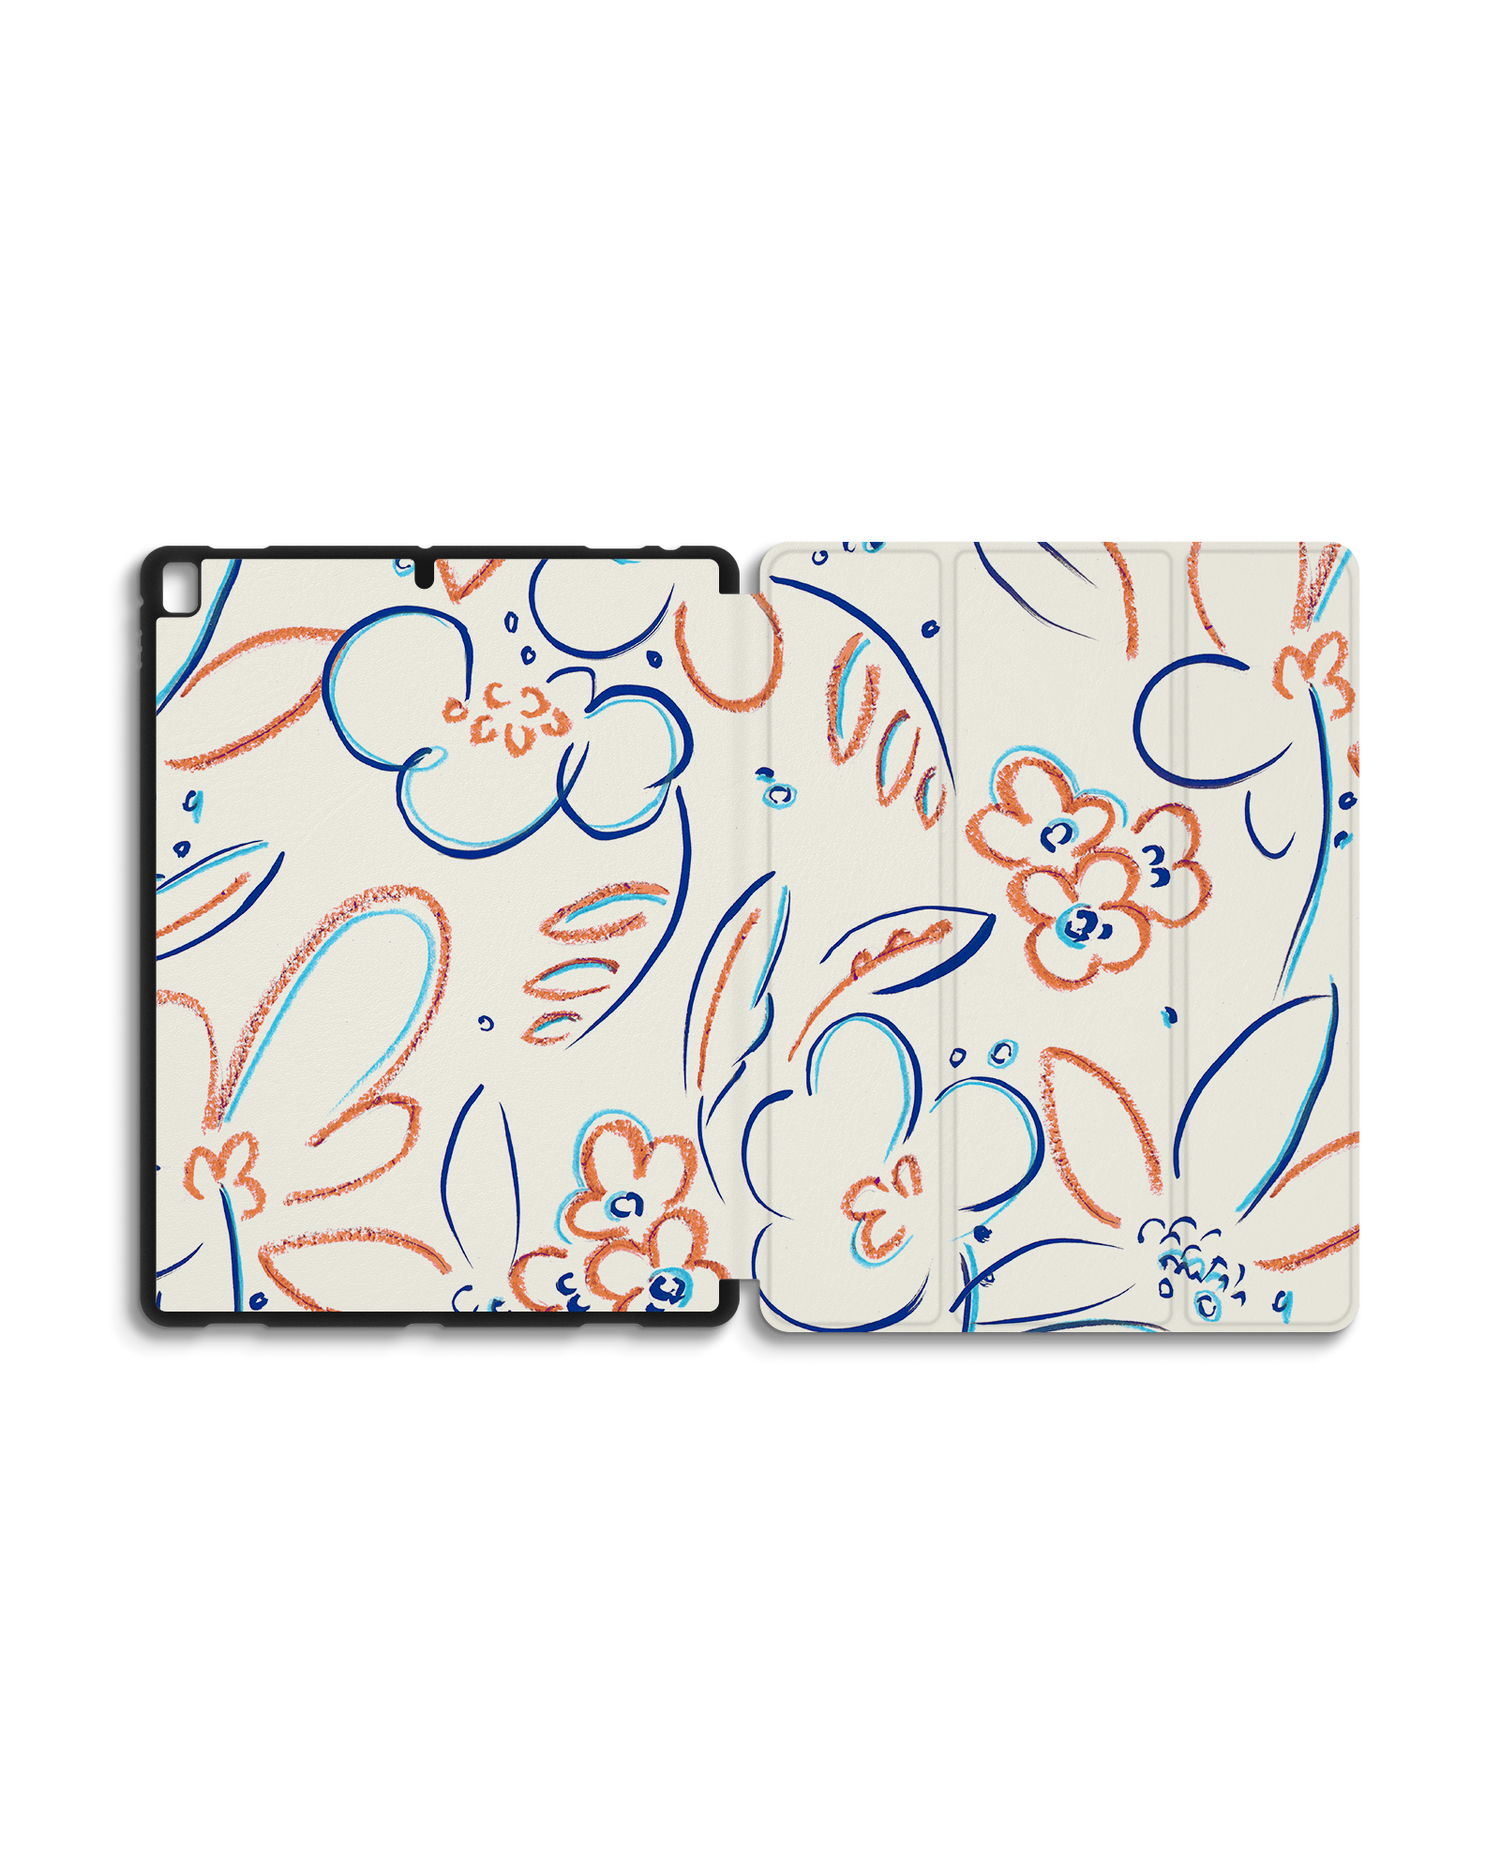 Bloom Doodles iPad Case with Pencil Holder for Apple iPad Pro 2 12.9